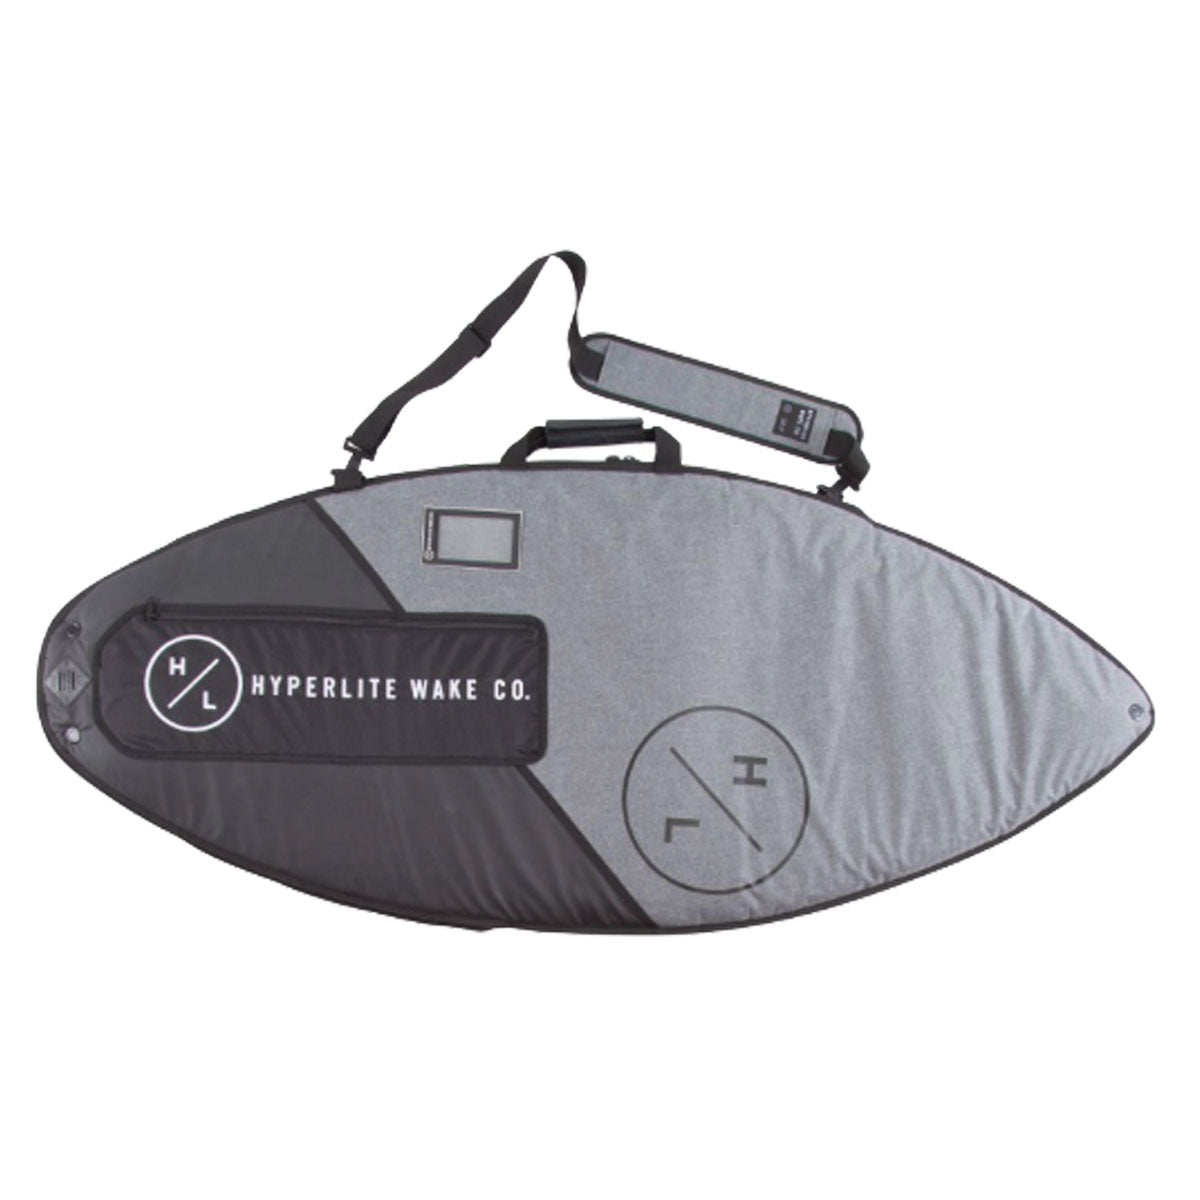 The Hyperlite Wakesurf Bag is a surfboard bag equipped with inner and outer pockets, providing large storage area for your belongings. Additionally, it features a convenient handle that makes carrying your surfboard easier.